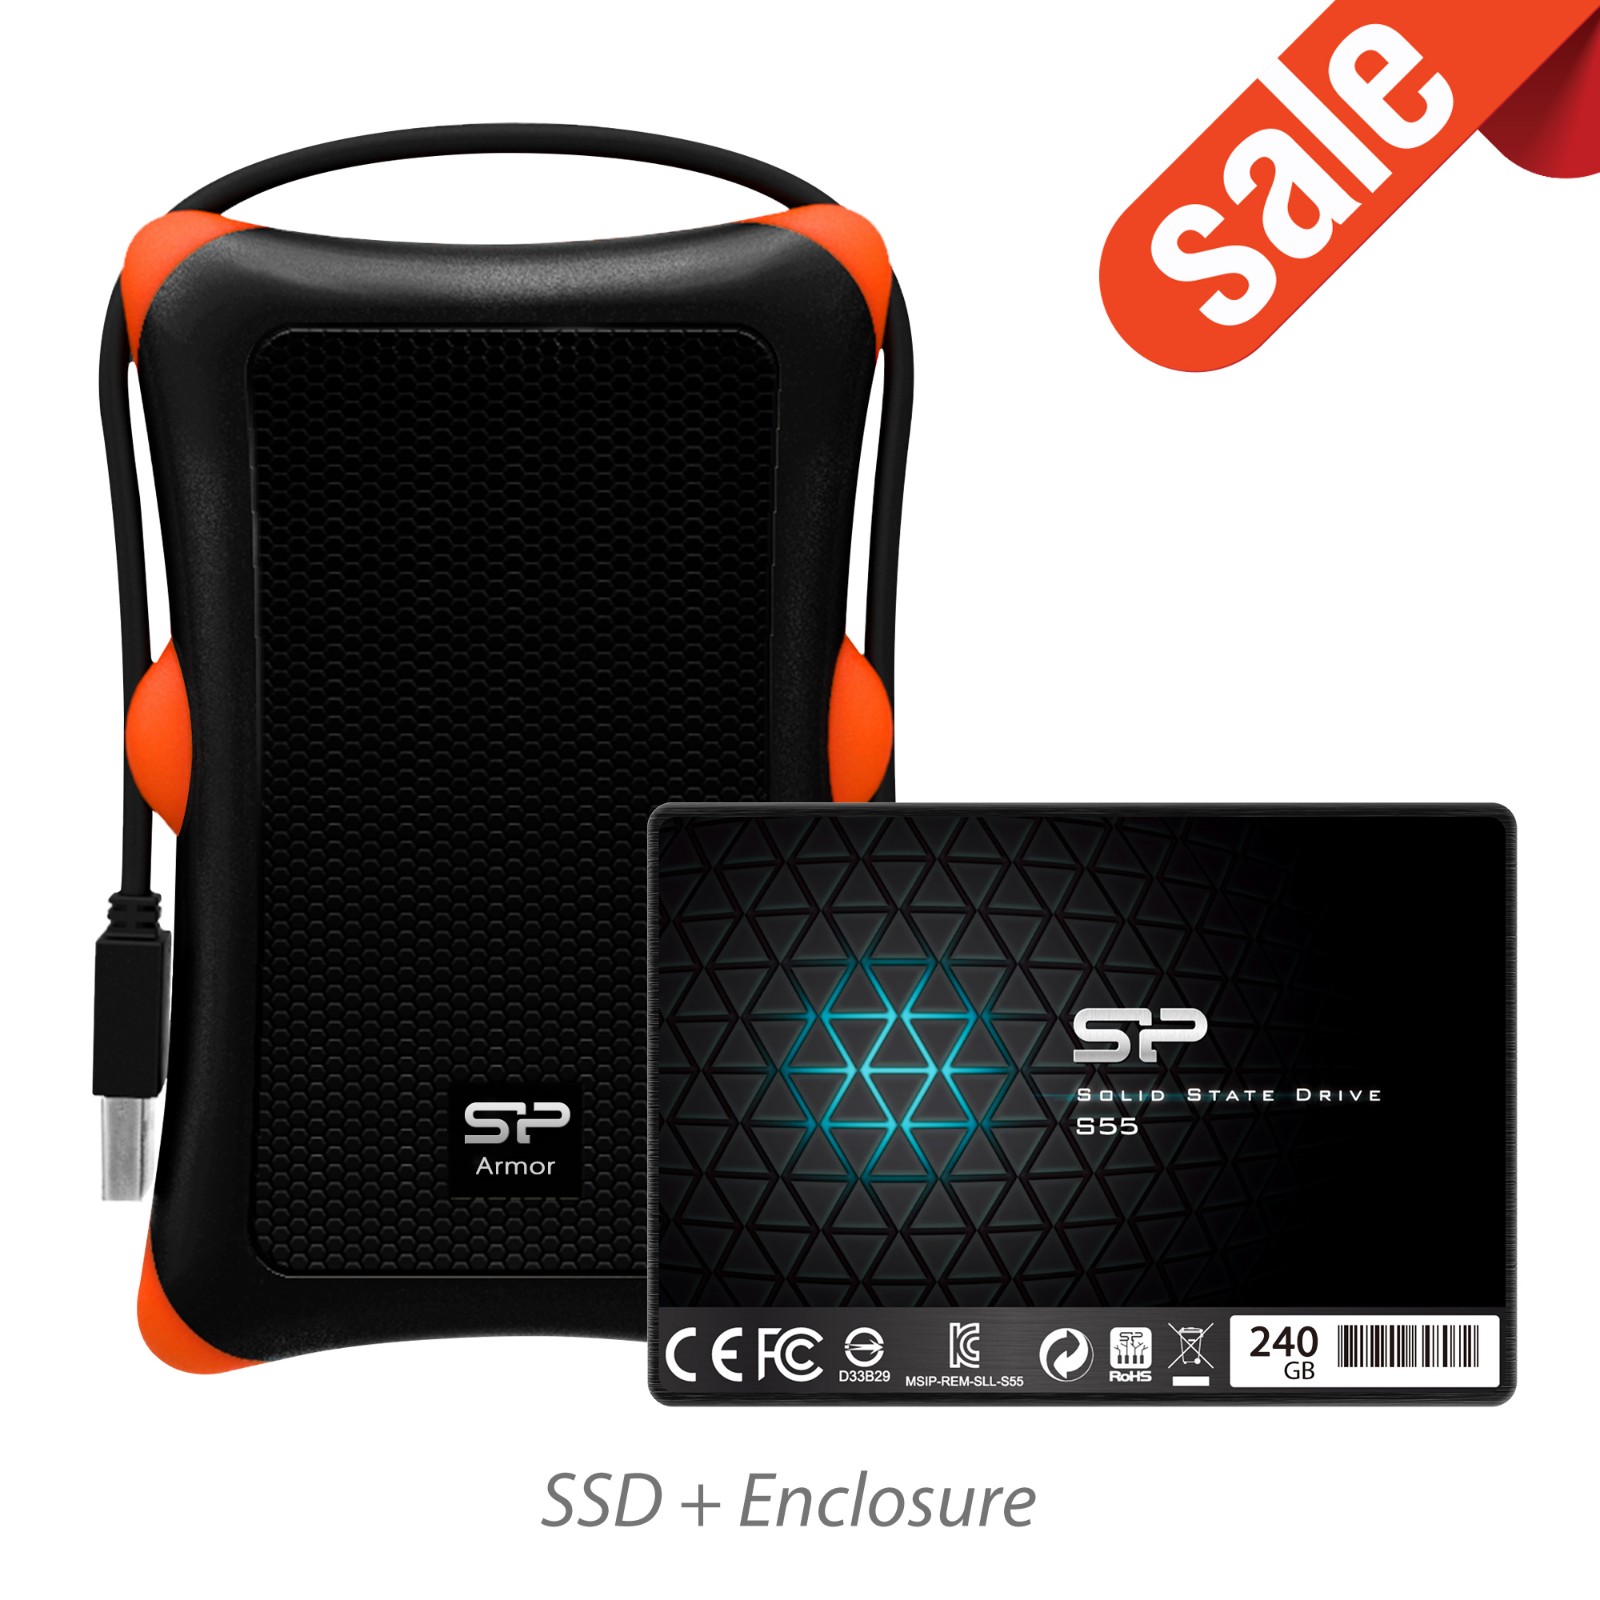 Silicon Power 240GB S55 SSD Upgrade Kit w/shockproof enclosure